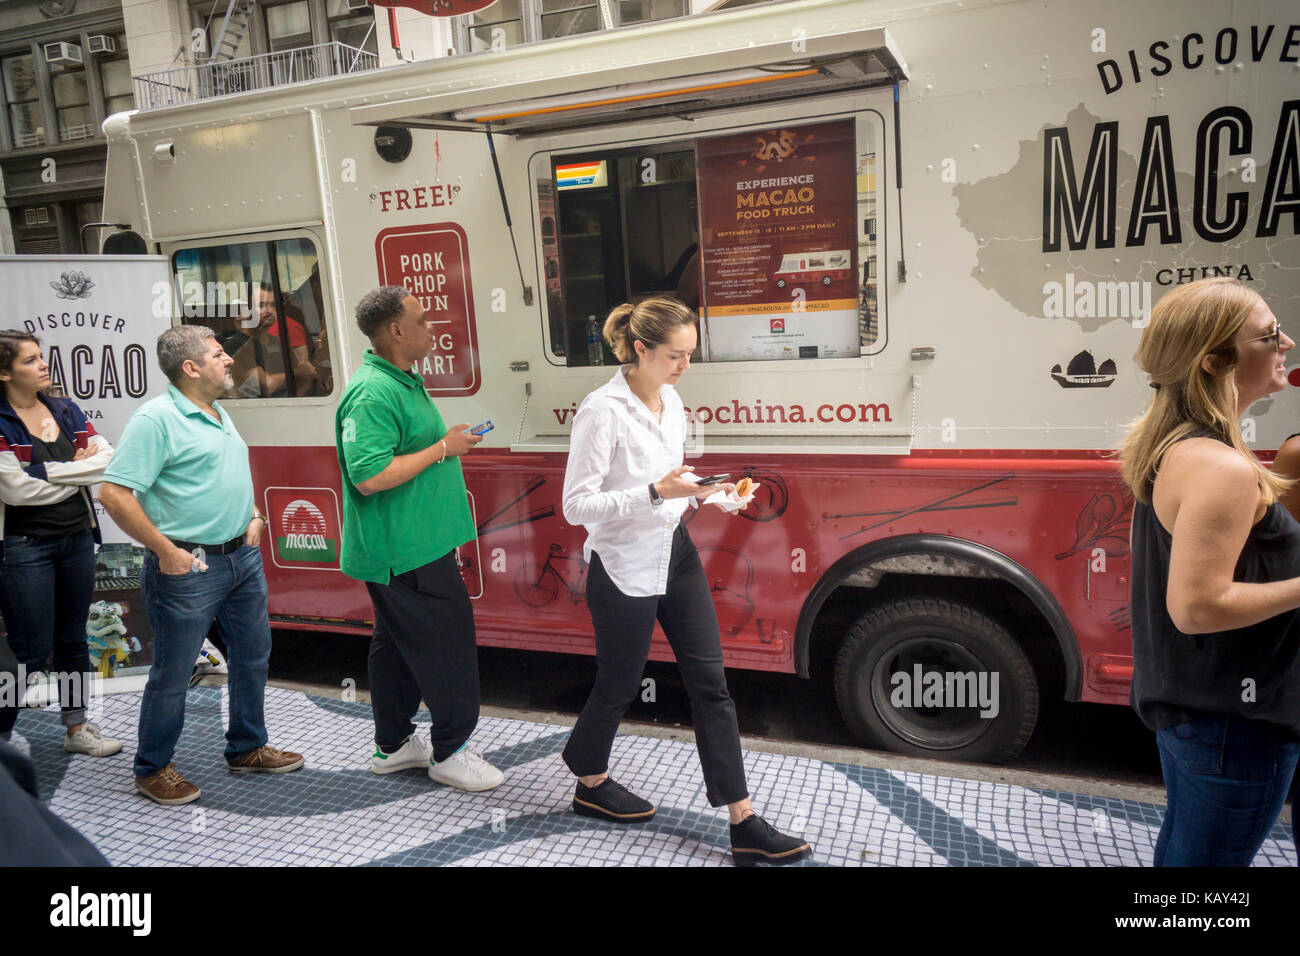 A food truck distributes samples of cuisine from Macao in New York on Tuesday, September 19, 2017 during a branding event for Macao Tourism. Macao is an autonomous region of China and was a Portuguese colony until it was returned to China on December 20, 1999. The Macao tourism office was promoting visits to the city touting the cuisine and the Portuguese influences. (© Richard B. Levine) Stock Photo